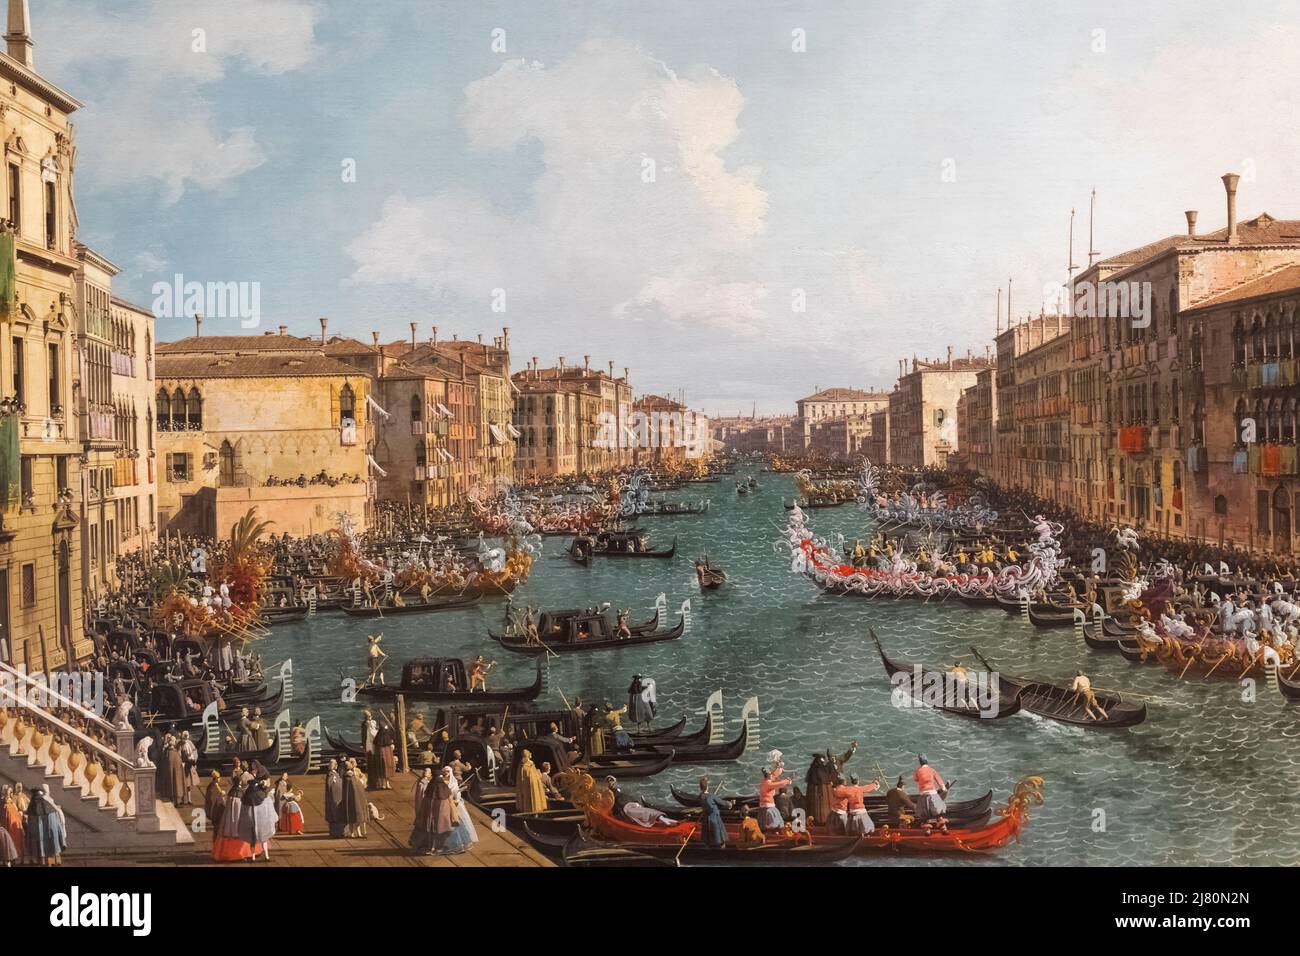 Painting titled "A Regatta on The Grand Canal" by Italian Artist Canaletto dated 1740 Stock Photo